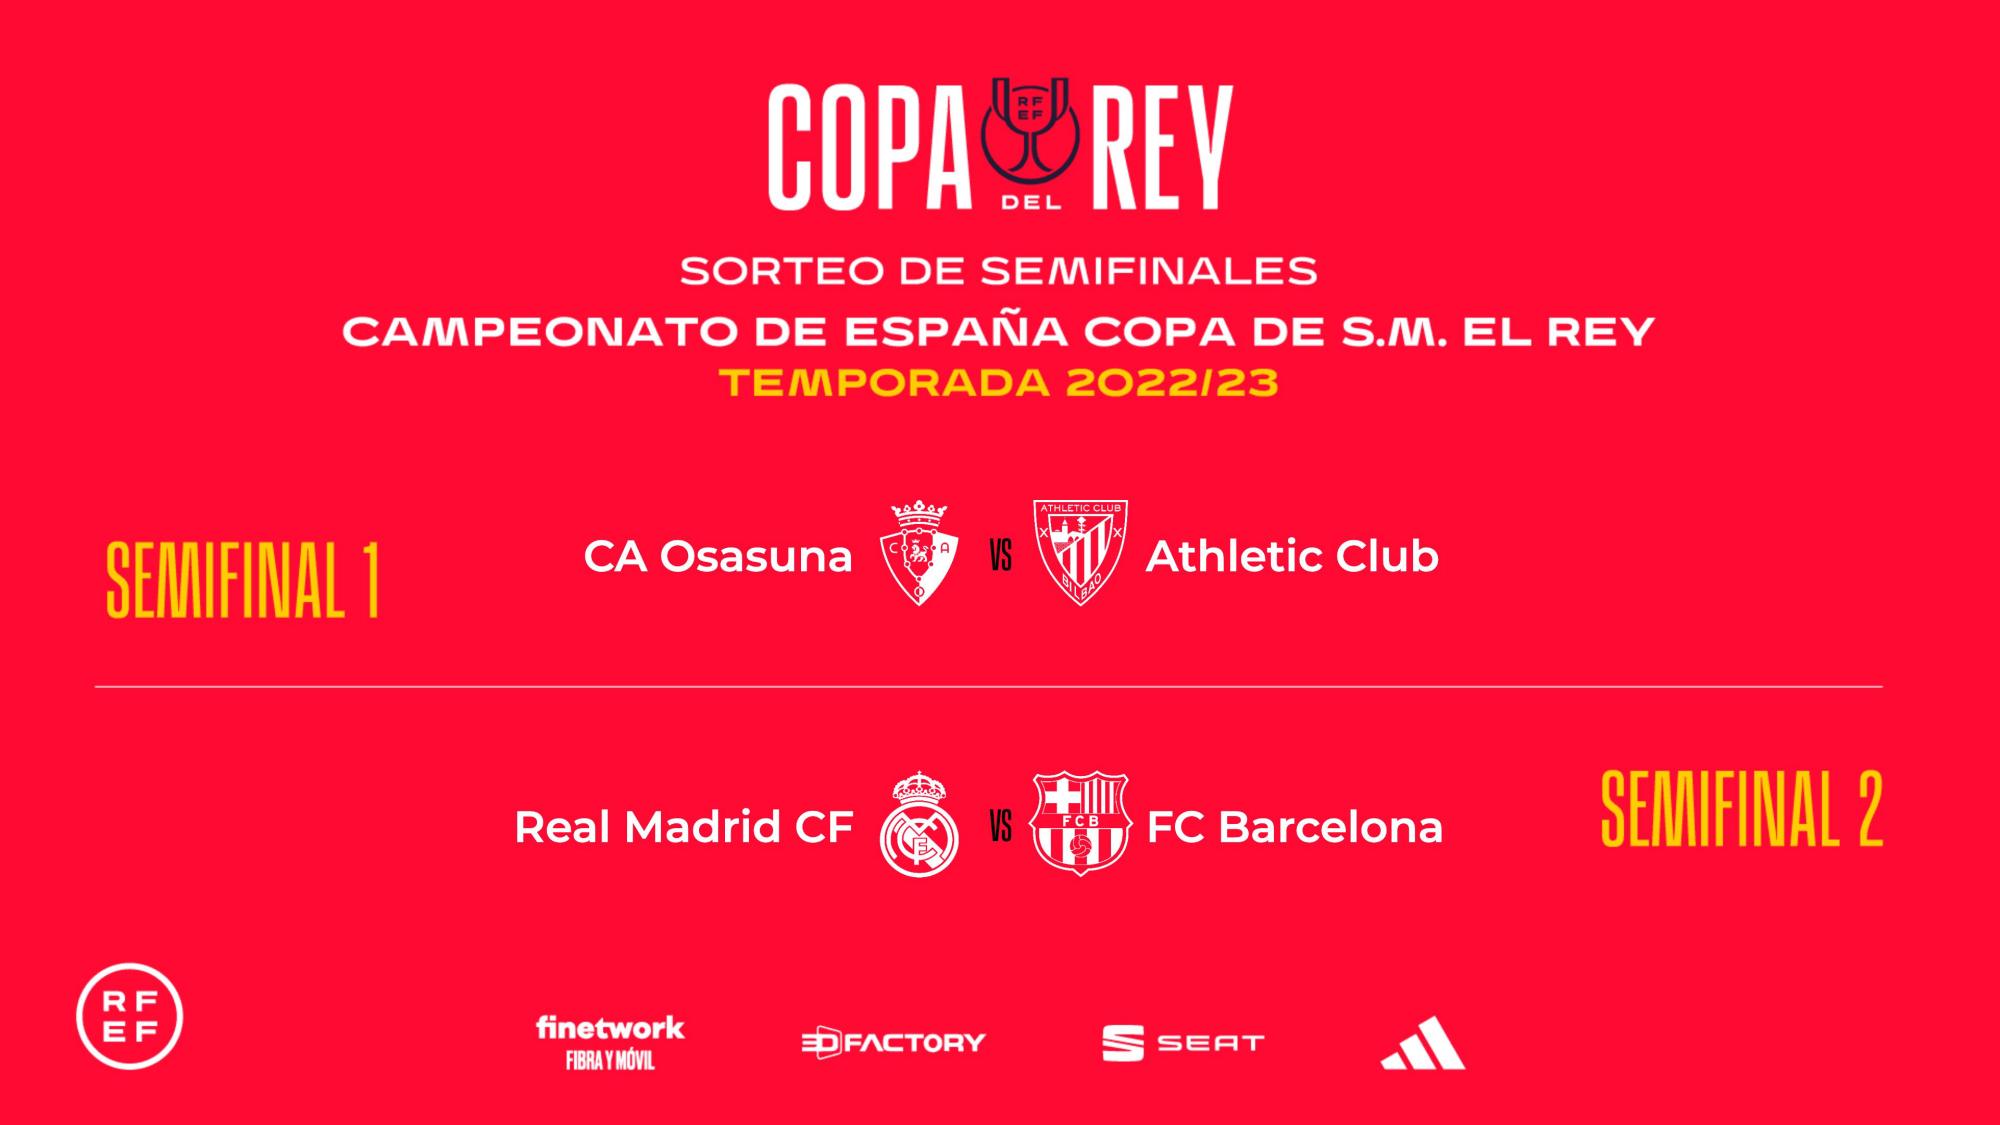 Osasuna against Athletic Club and Real Madrid against Barcelona in the Copa del Rey semifinals.